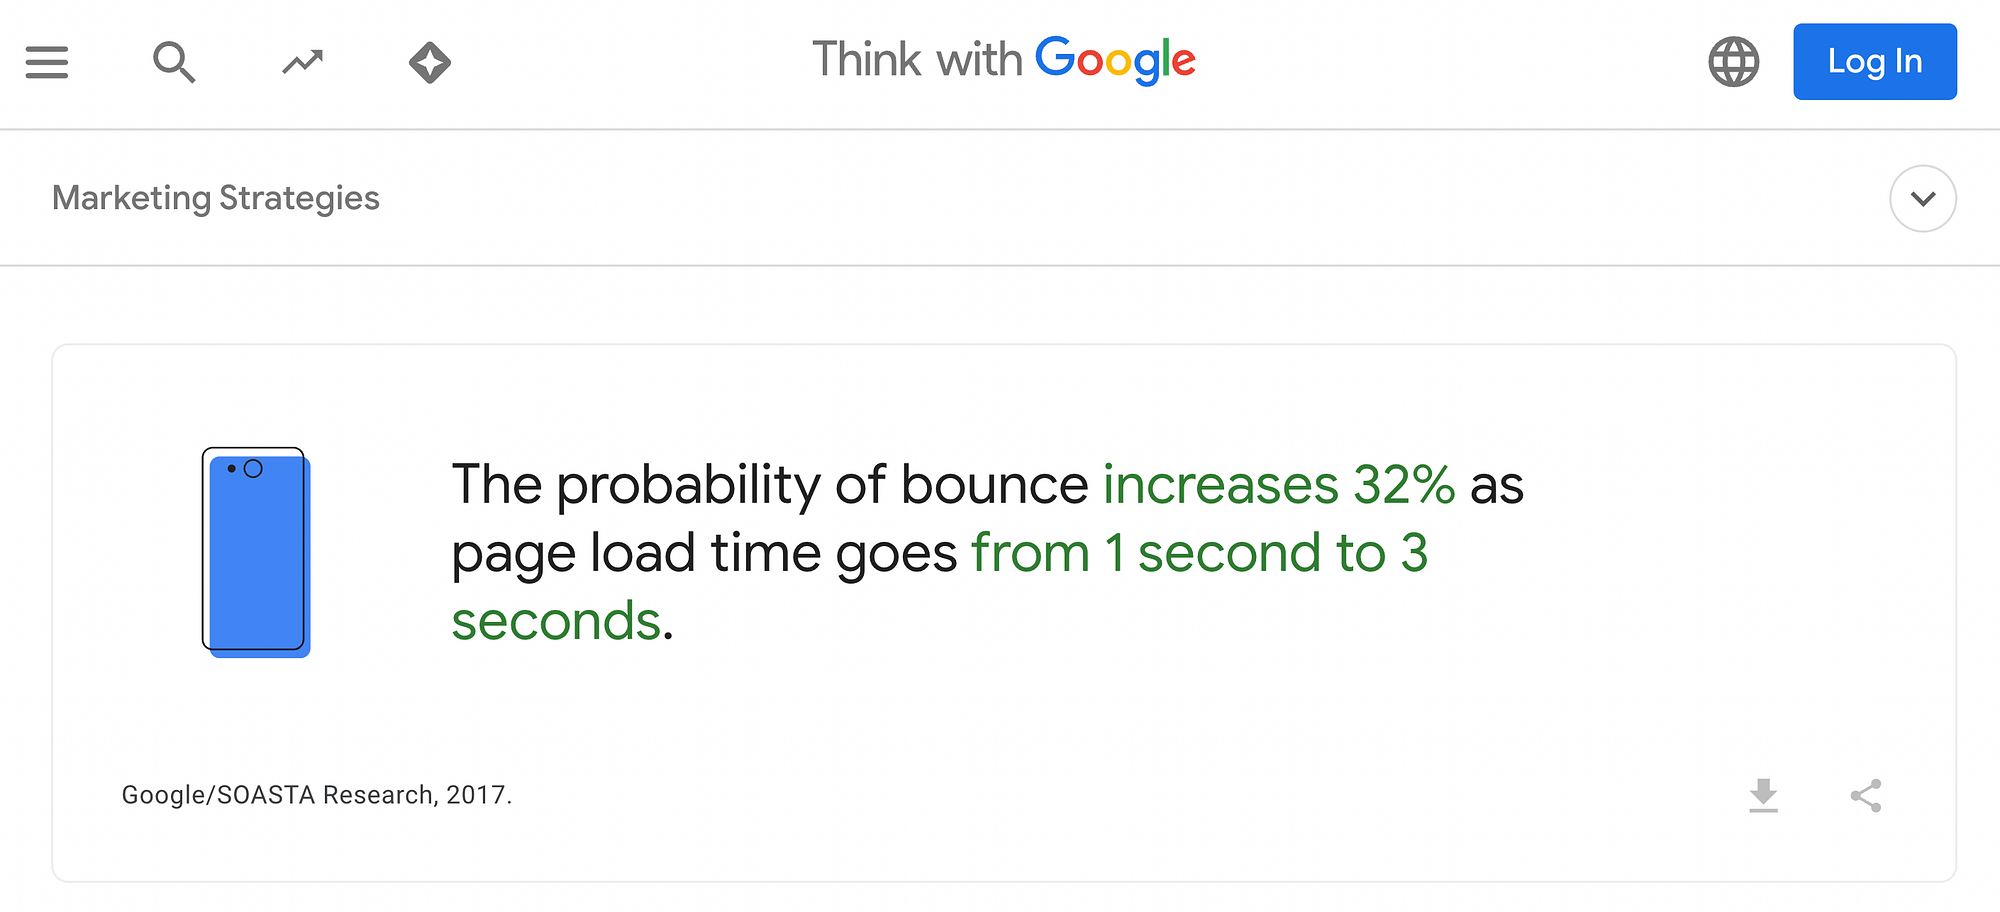 Google statistics on bounce rate and page loading times.